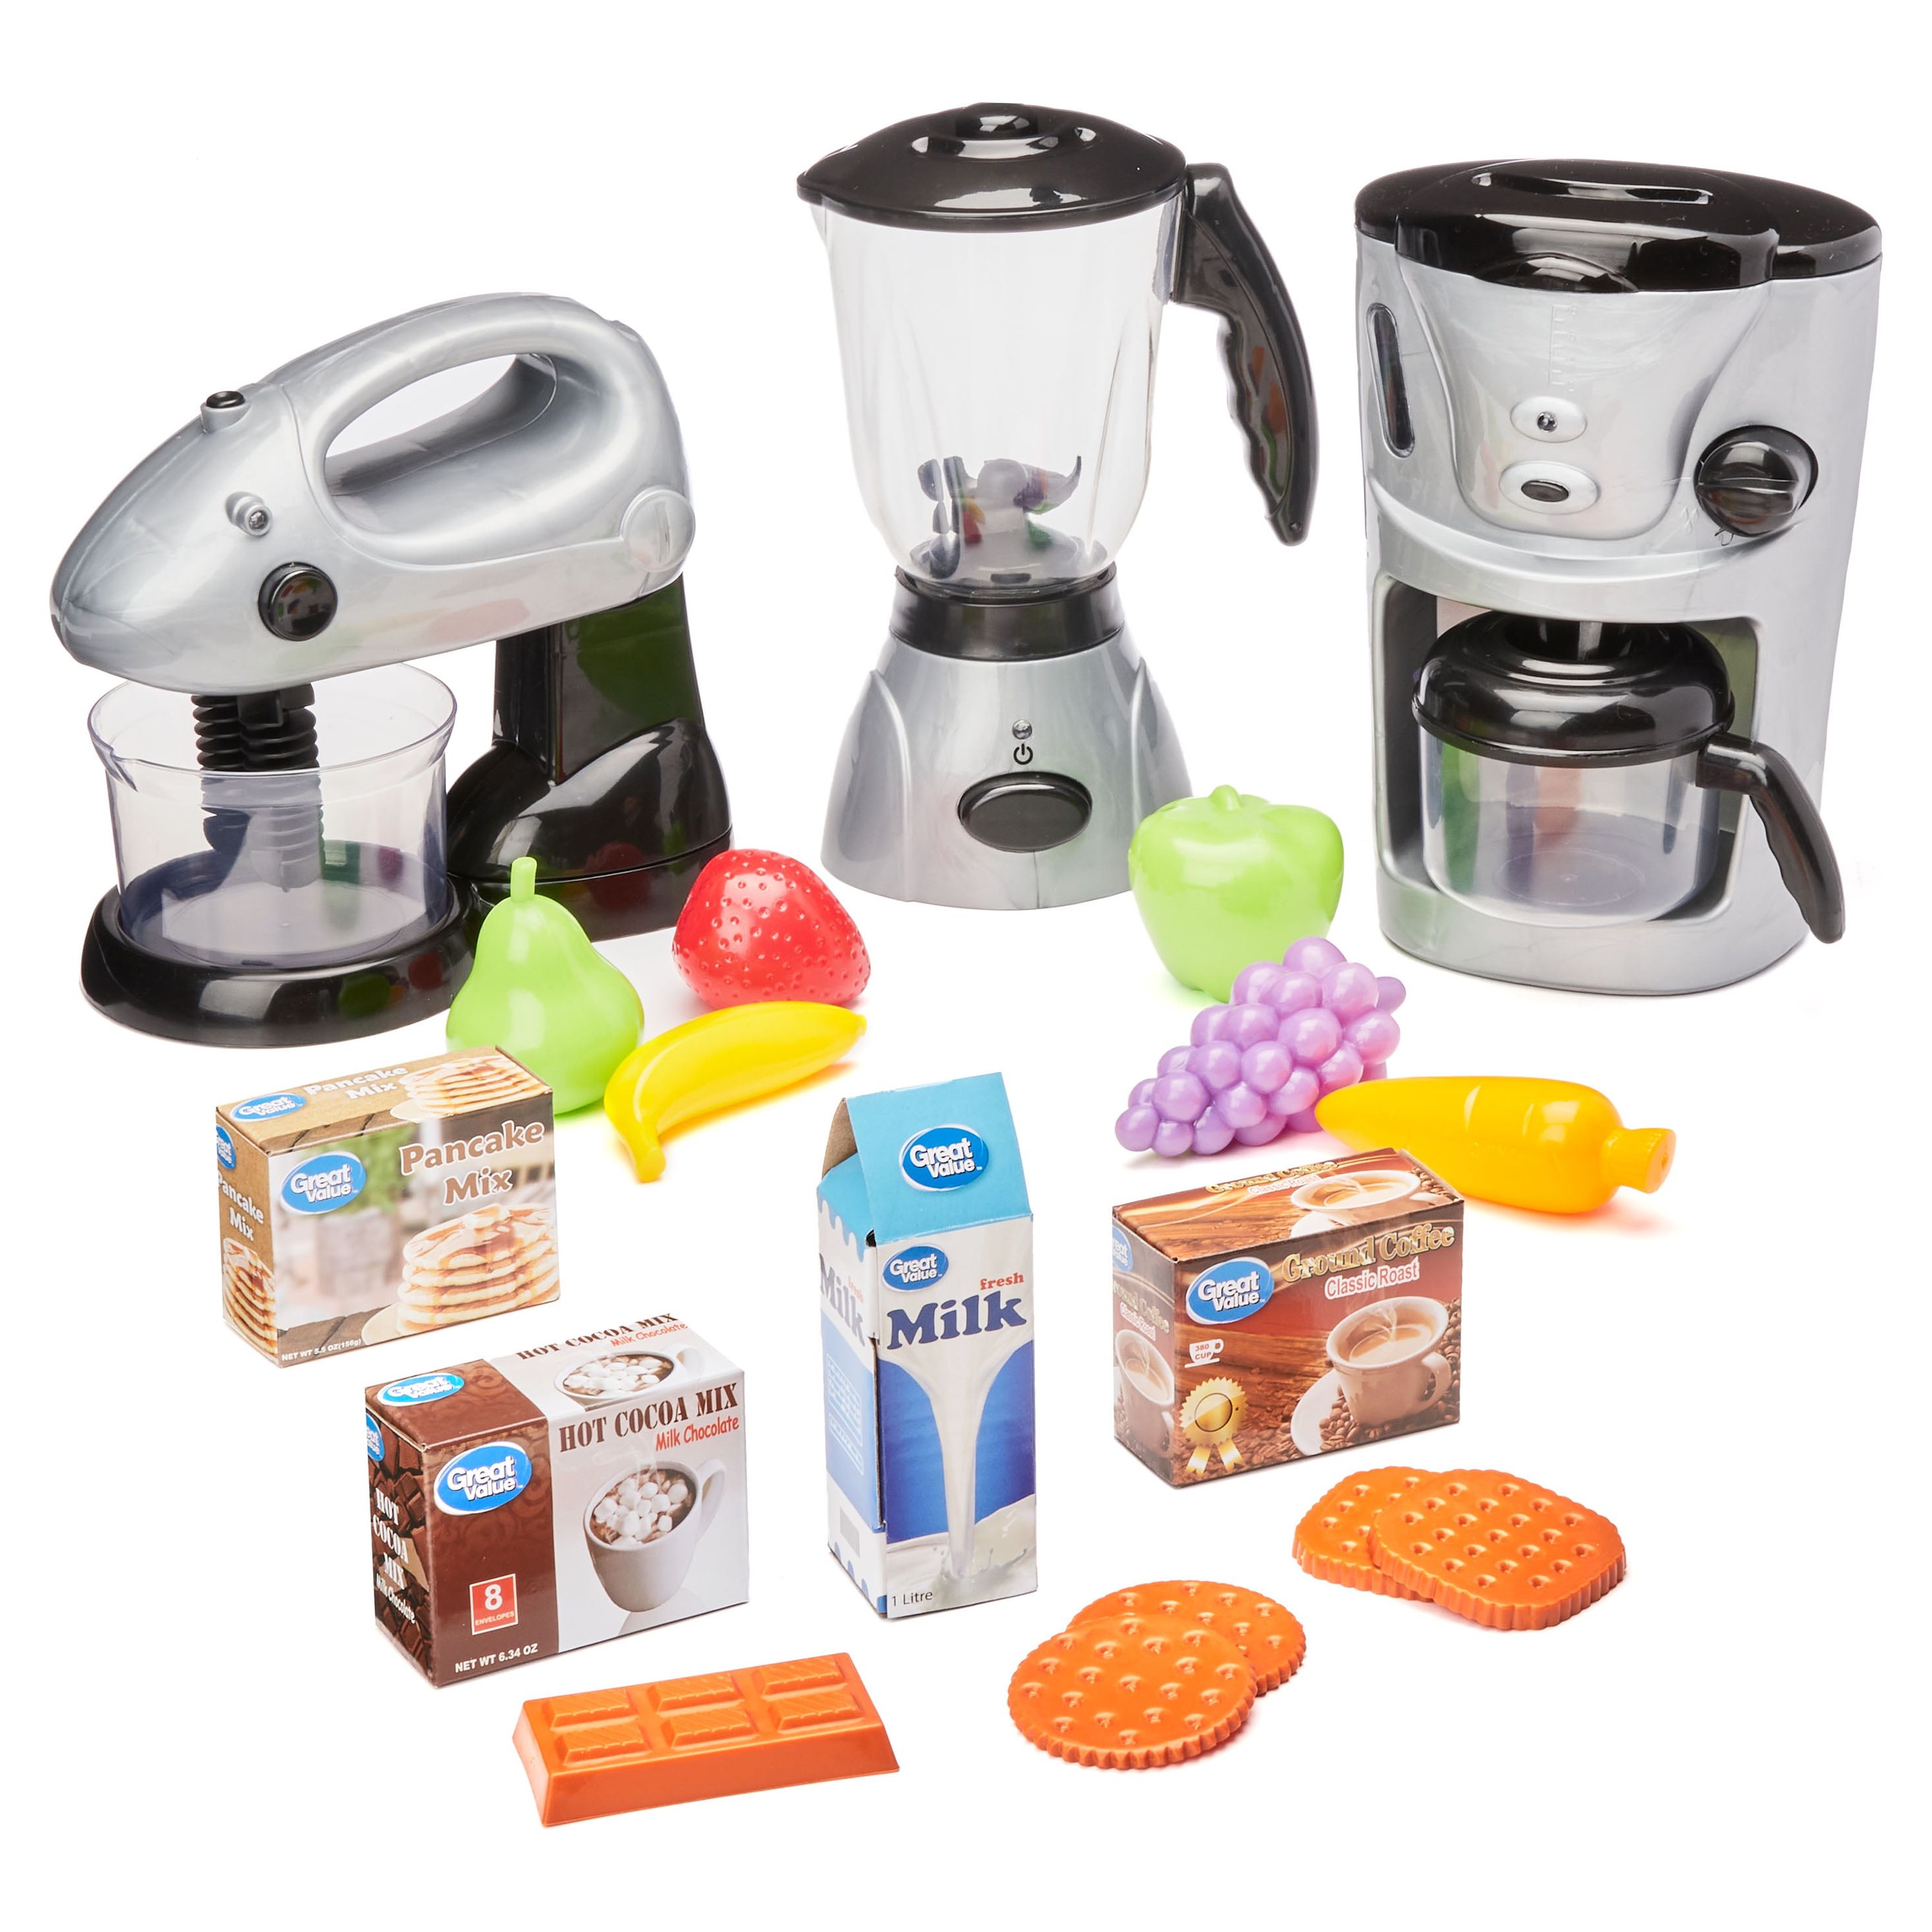 Kid Connection Kitchen Play Set, 18 Pieces - image 1 of 5